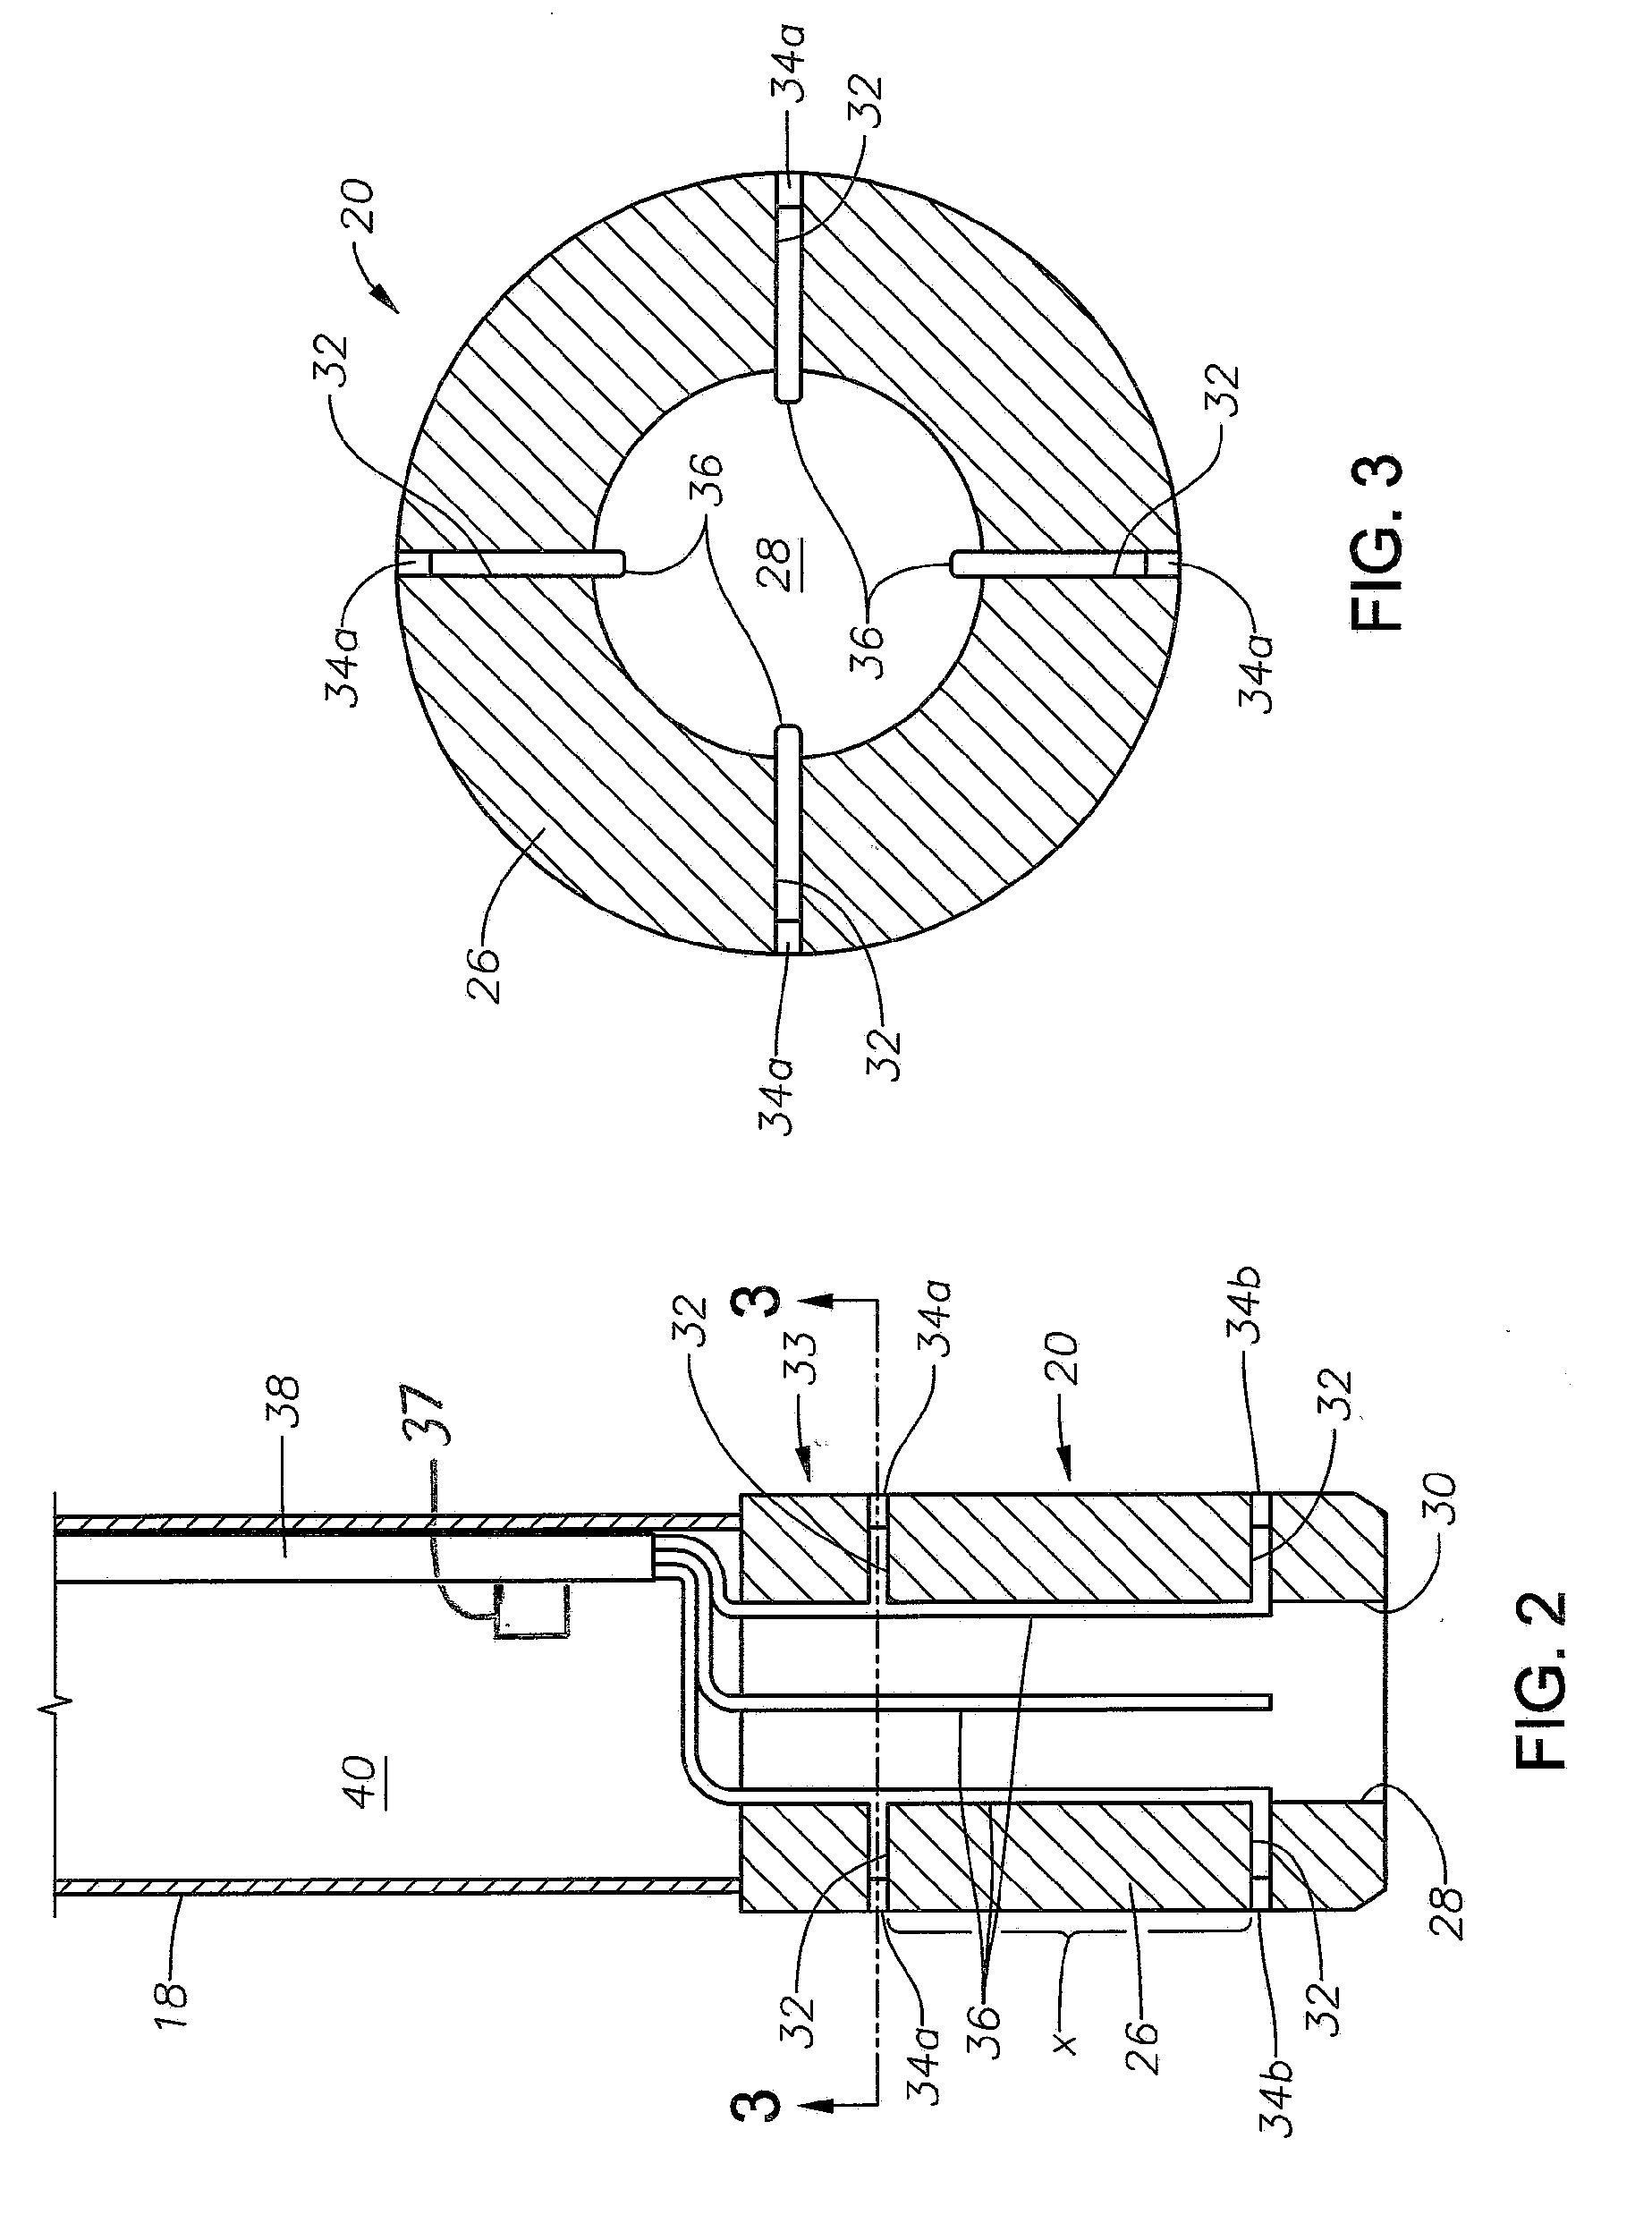 Real-Time Data Acquisition and Interpretation for Coiled Tubing Fluid Injection Operations